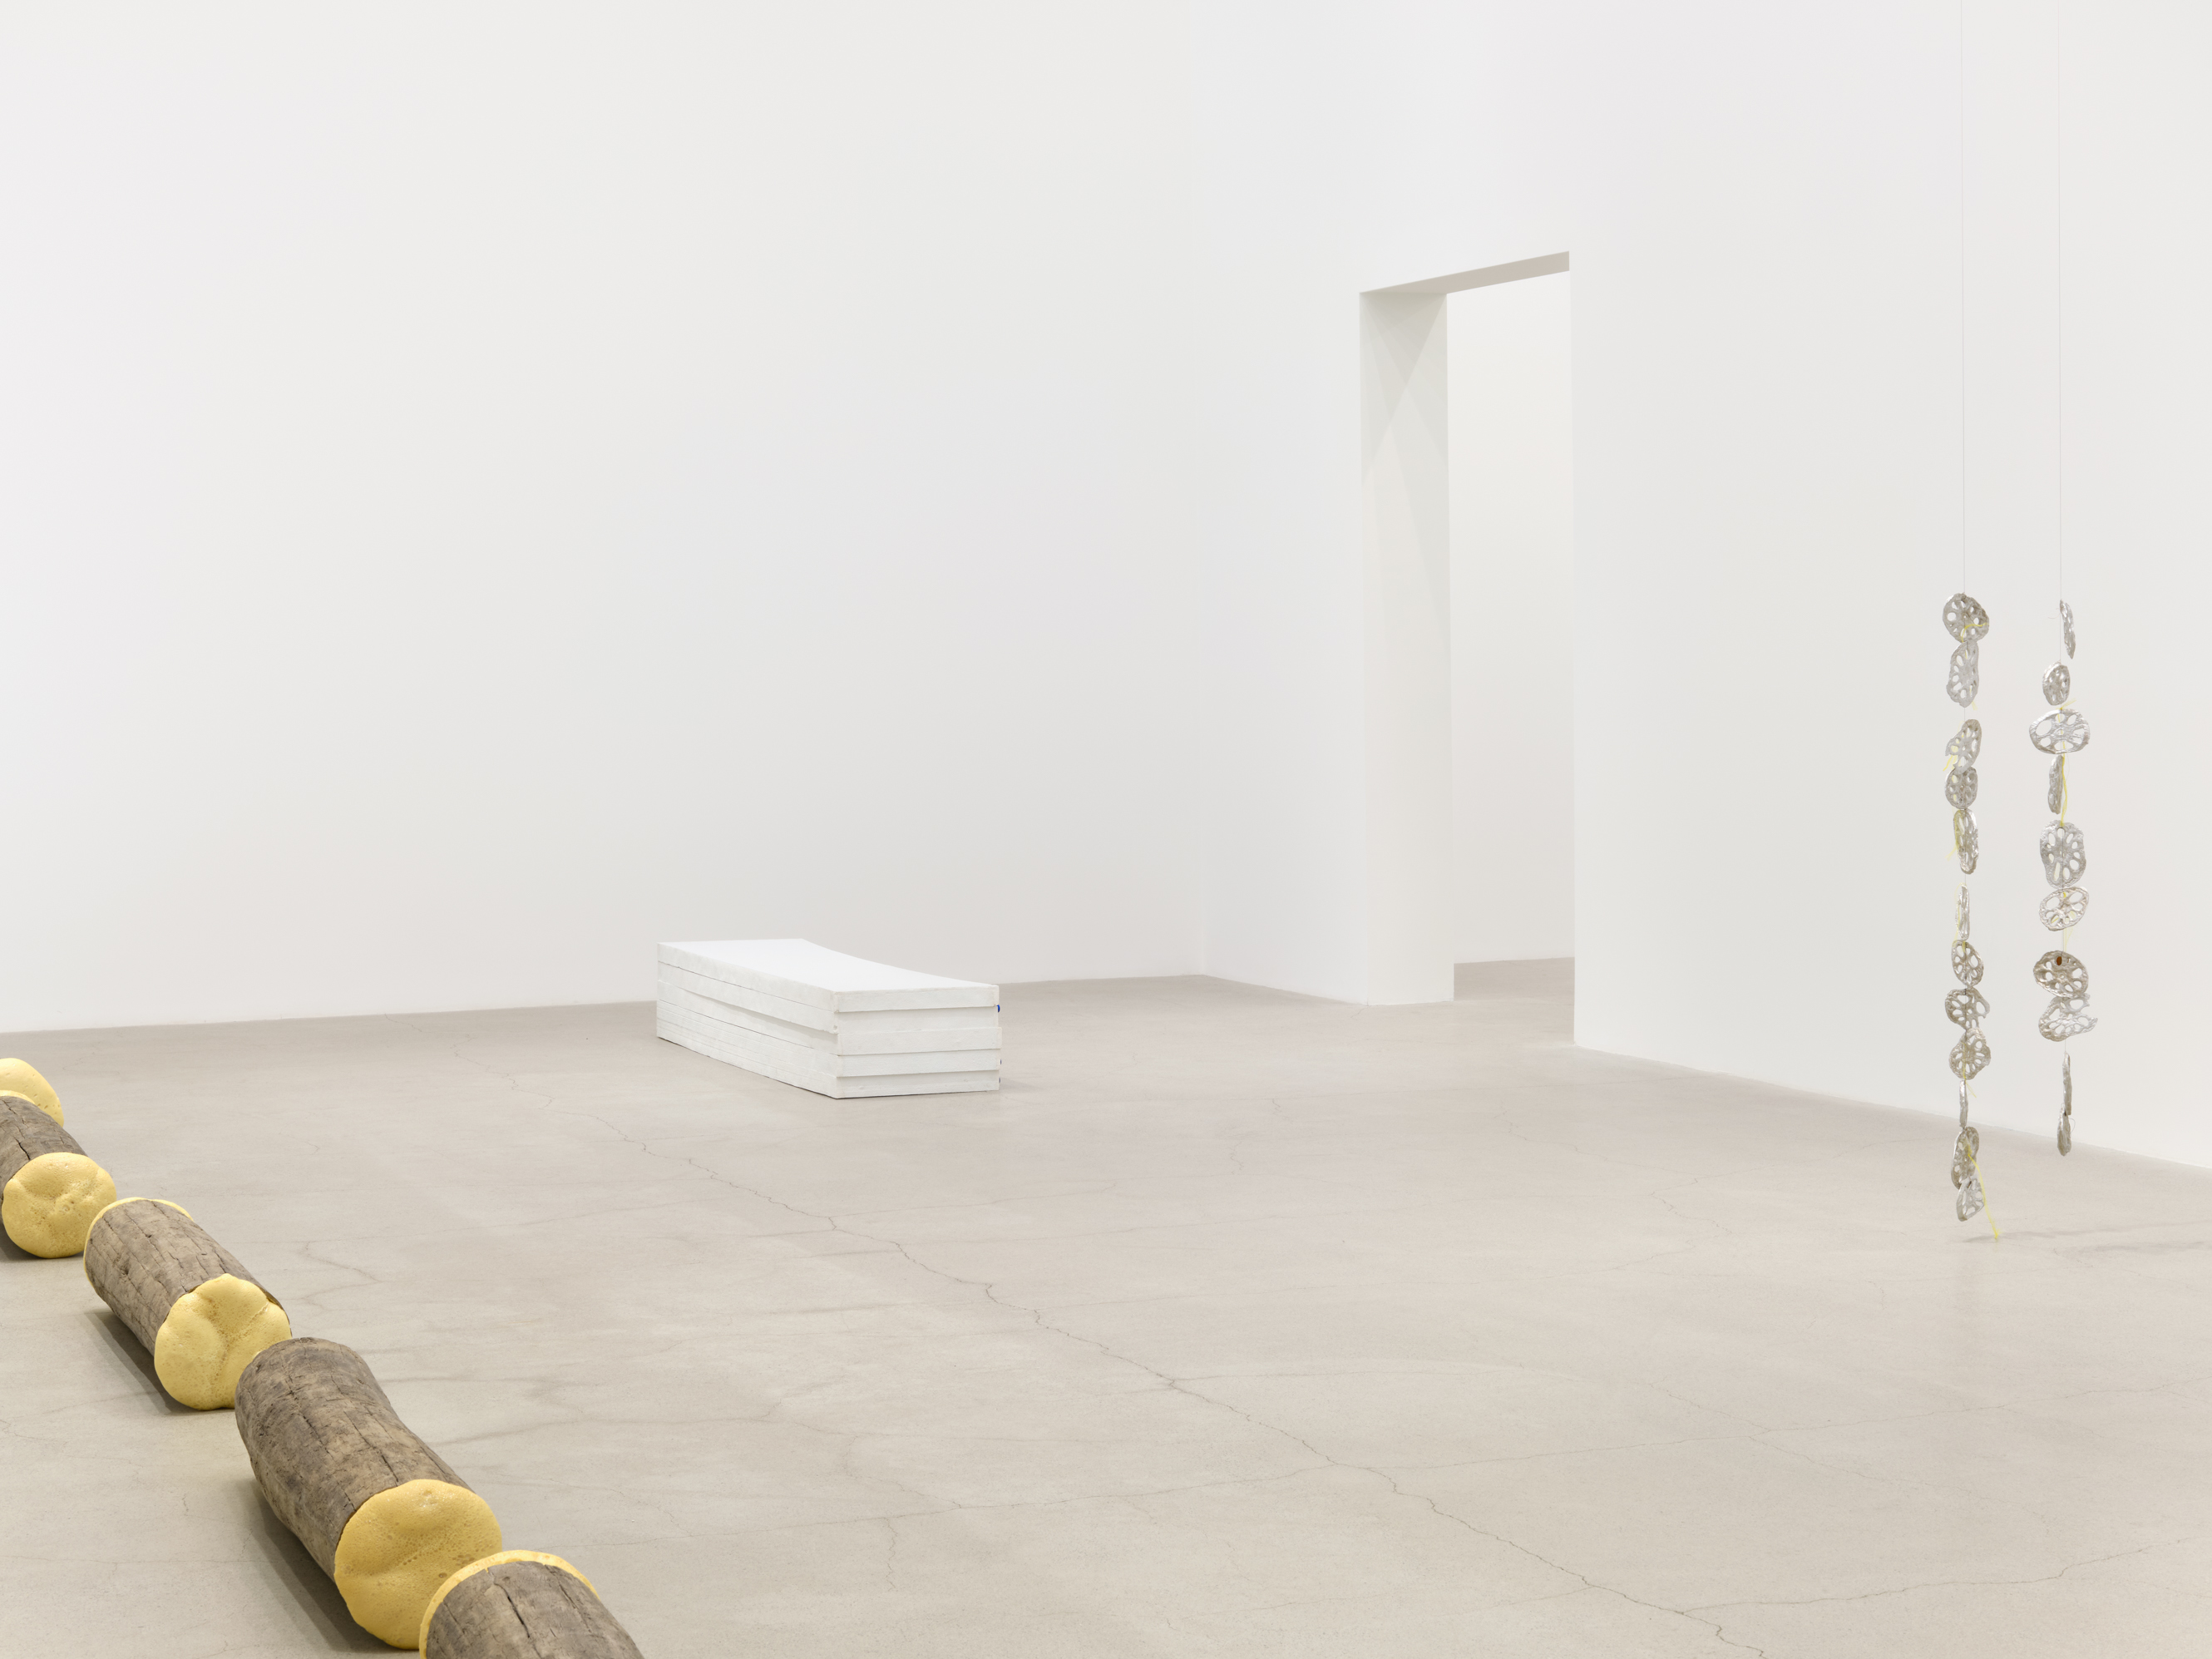 Liz Magor, Laurie Kang, installation view, Do Redo Repeat, Catriona Jeffries, Vancouver, 2022 by 